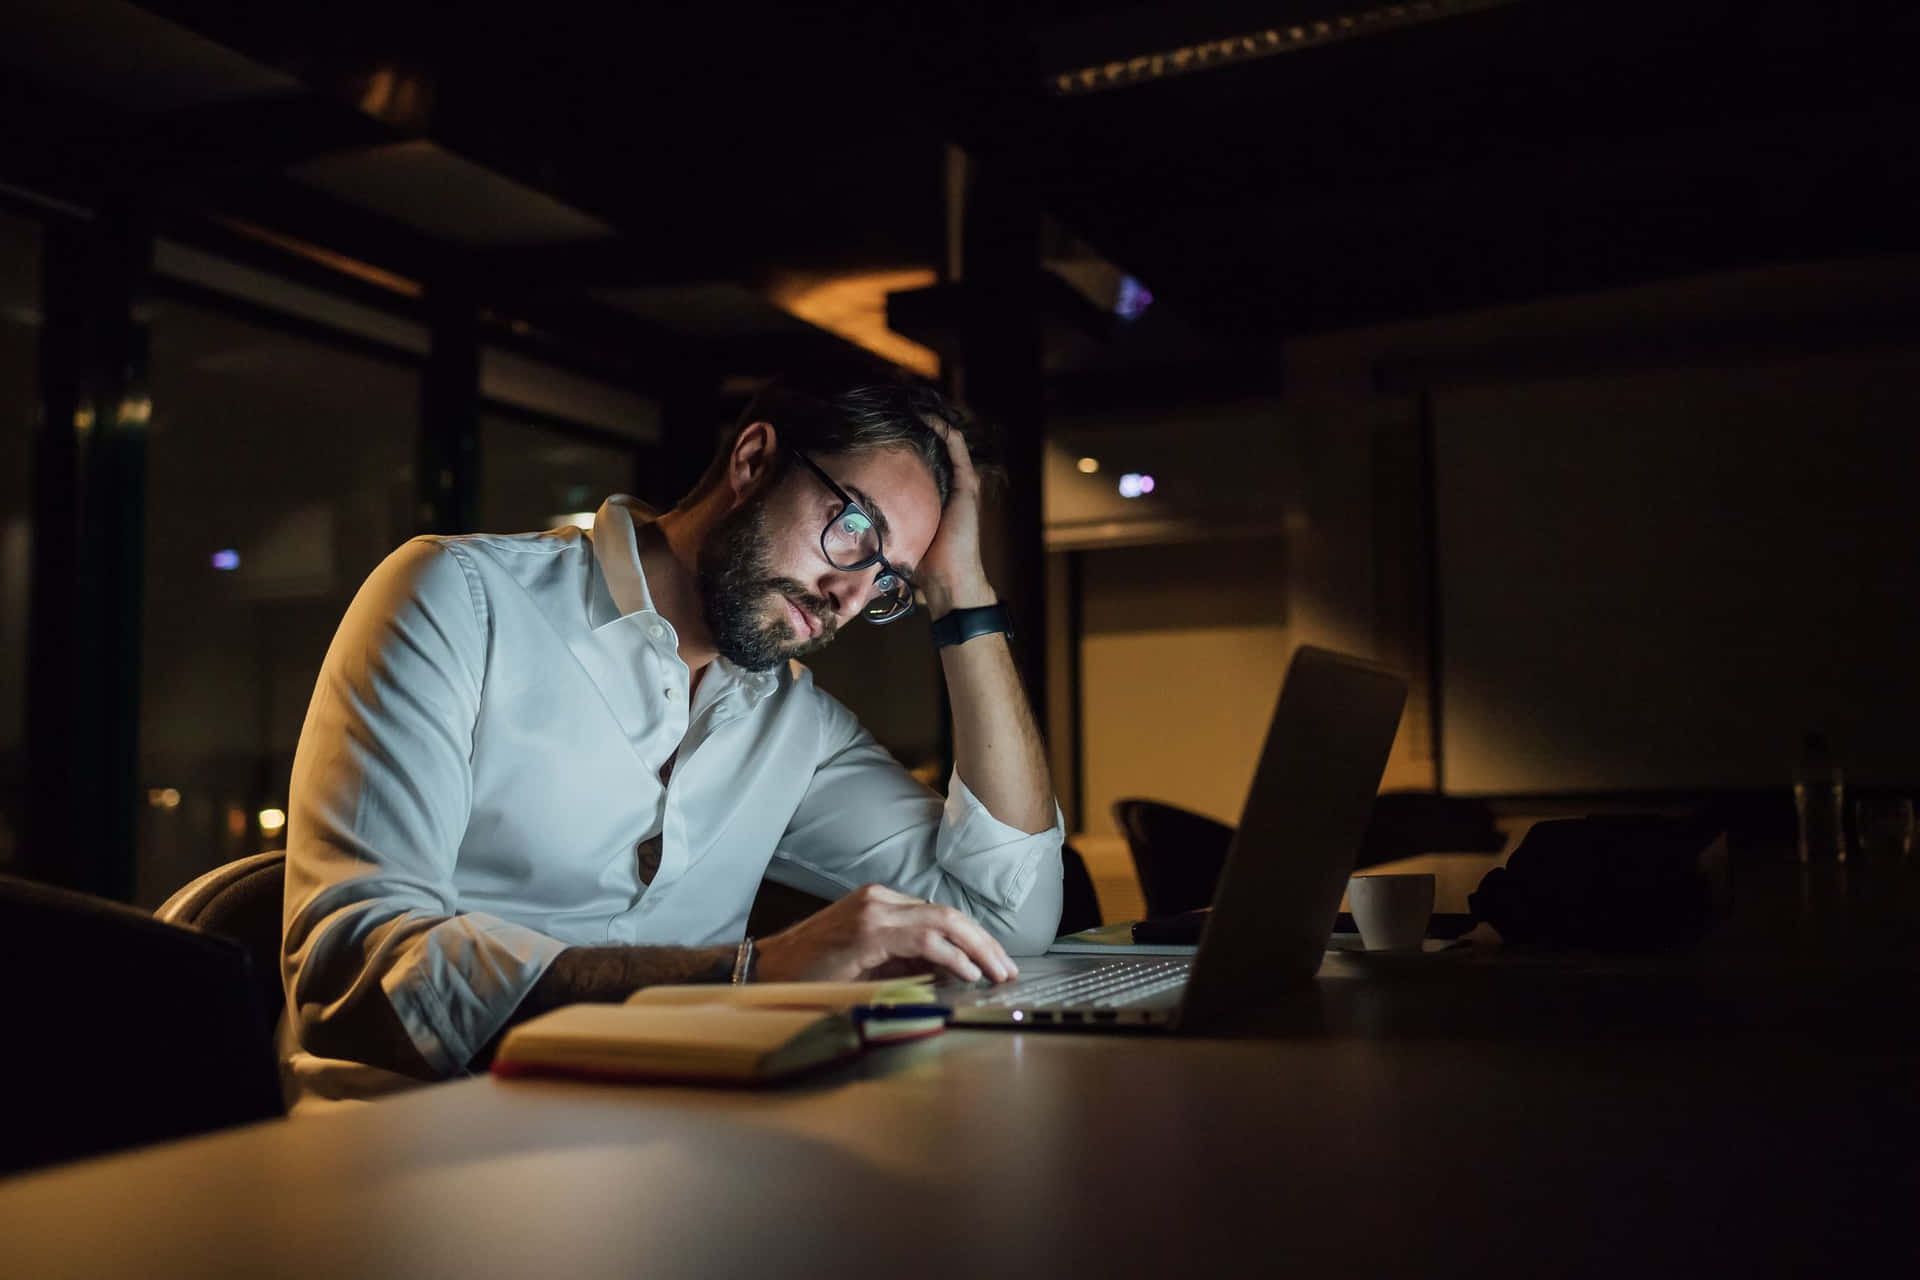 Man Working On Laptop At Night In Office